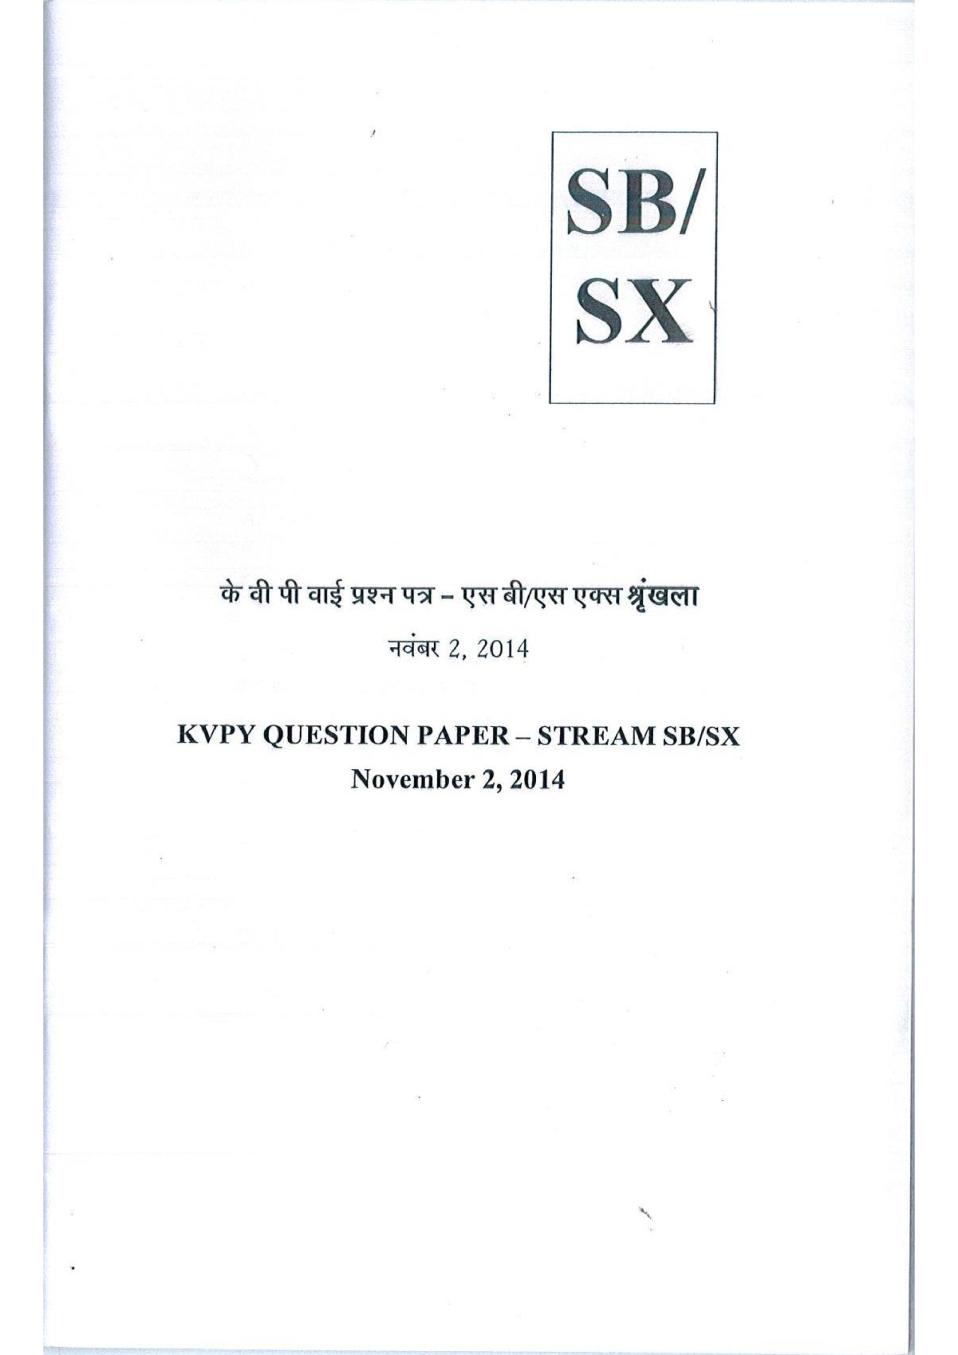 KVPY 2014 Question Paper with Answer Key for SB/SX Stream (Hindi Version) - Page 1